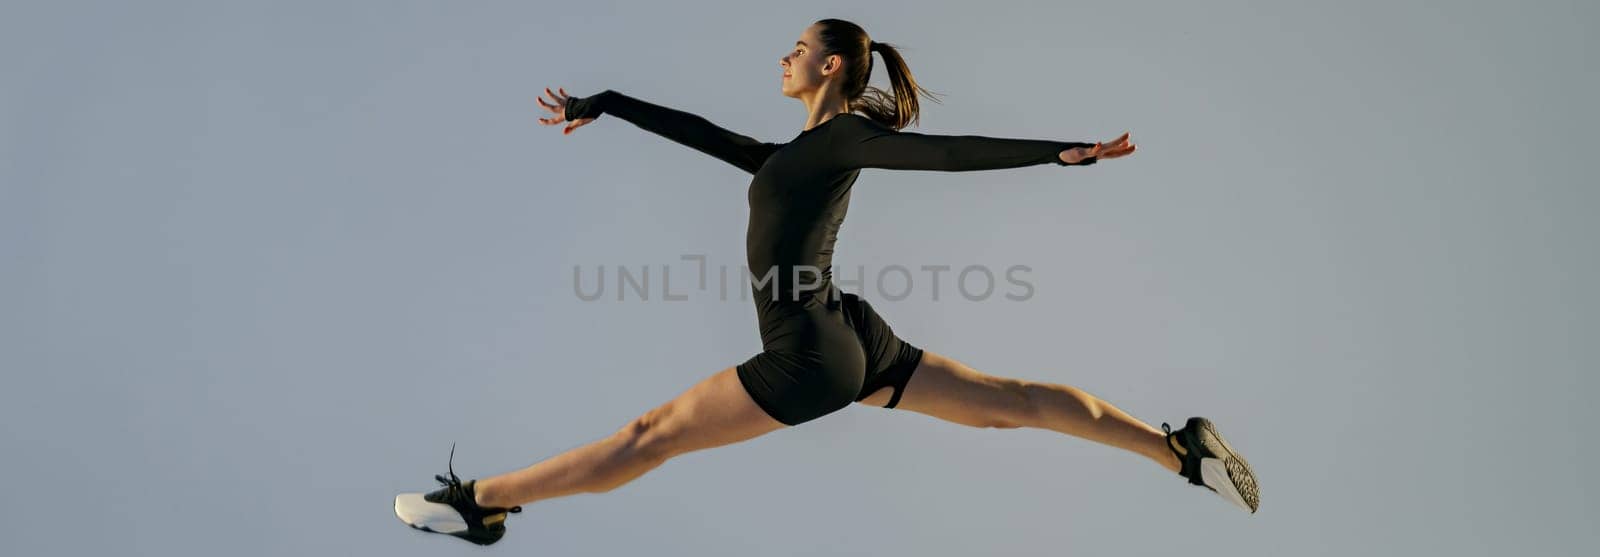 Sporty girl jumping doing split leap in air with joyful expression. Flexible and weightless concept by Yaroslav_astakhov